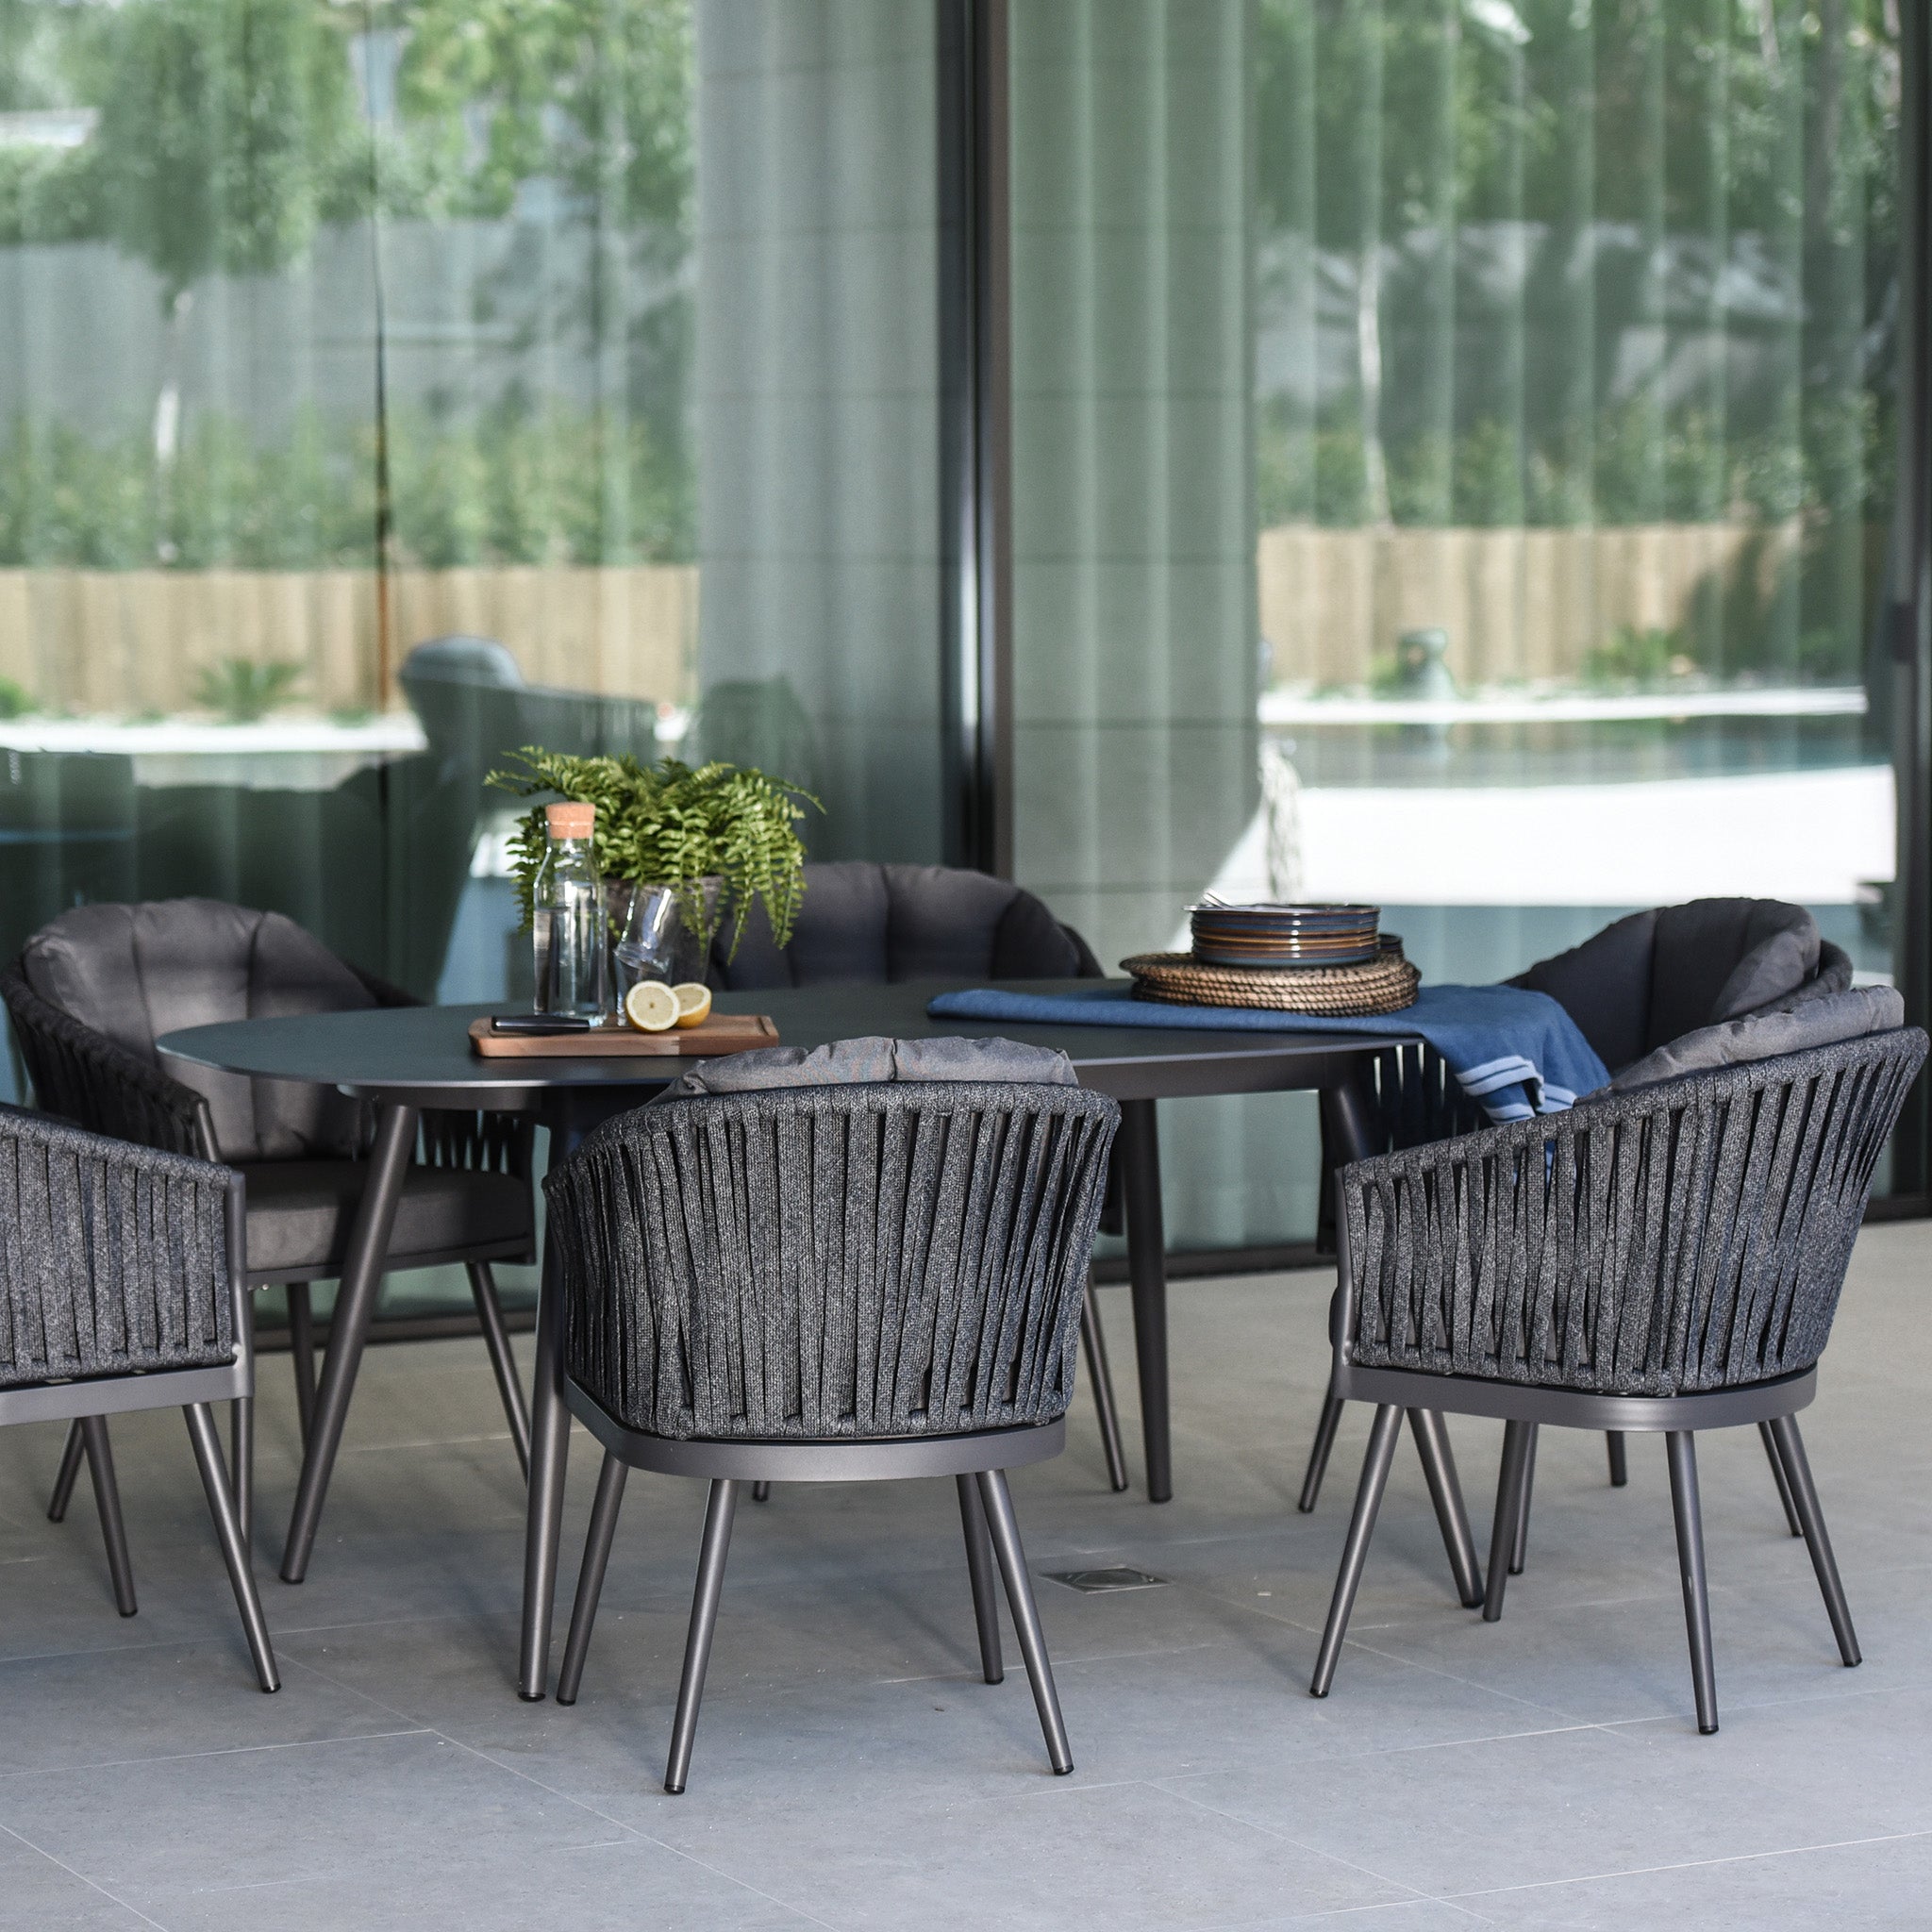 Monterrey 6 Seat Rope Dining Set with Oval Ceramic Table in Grey